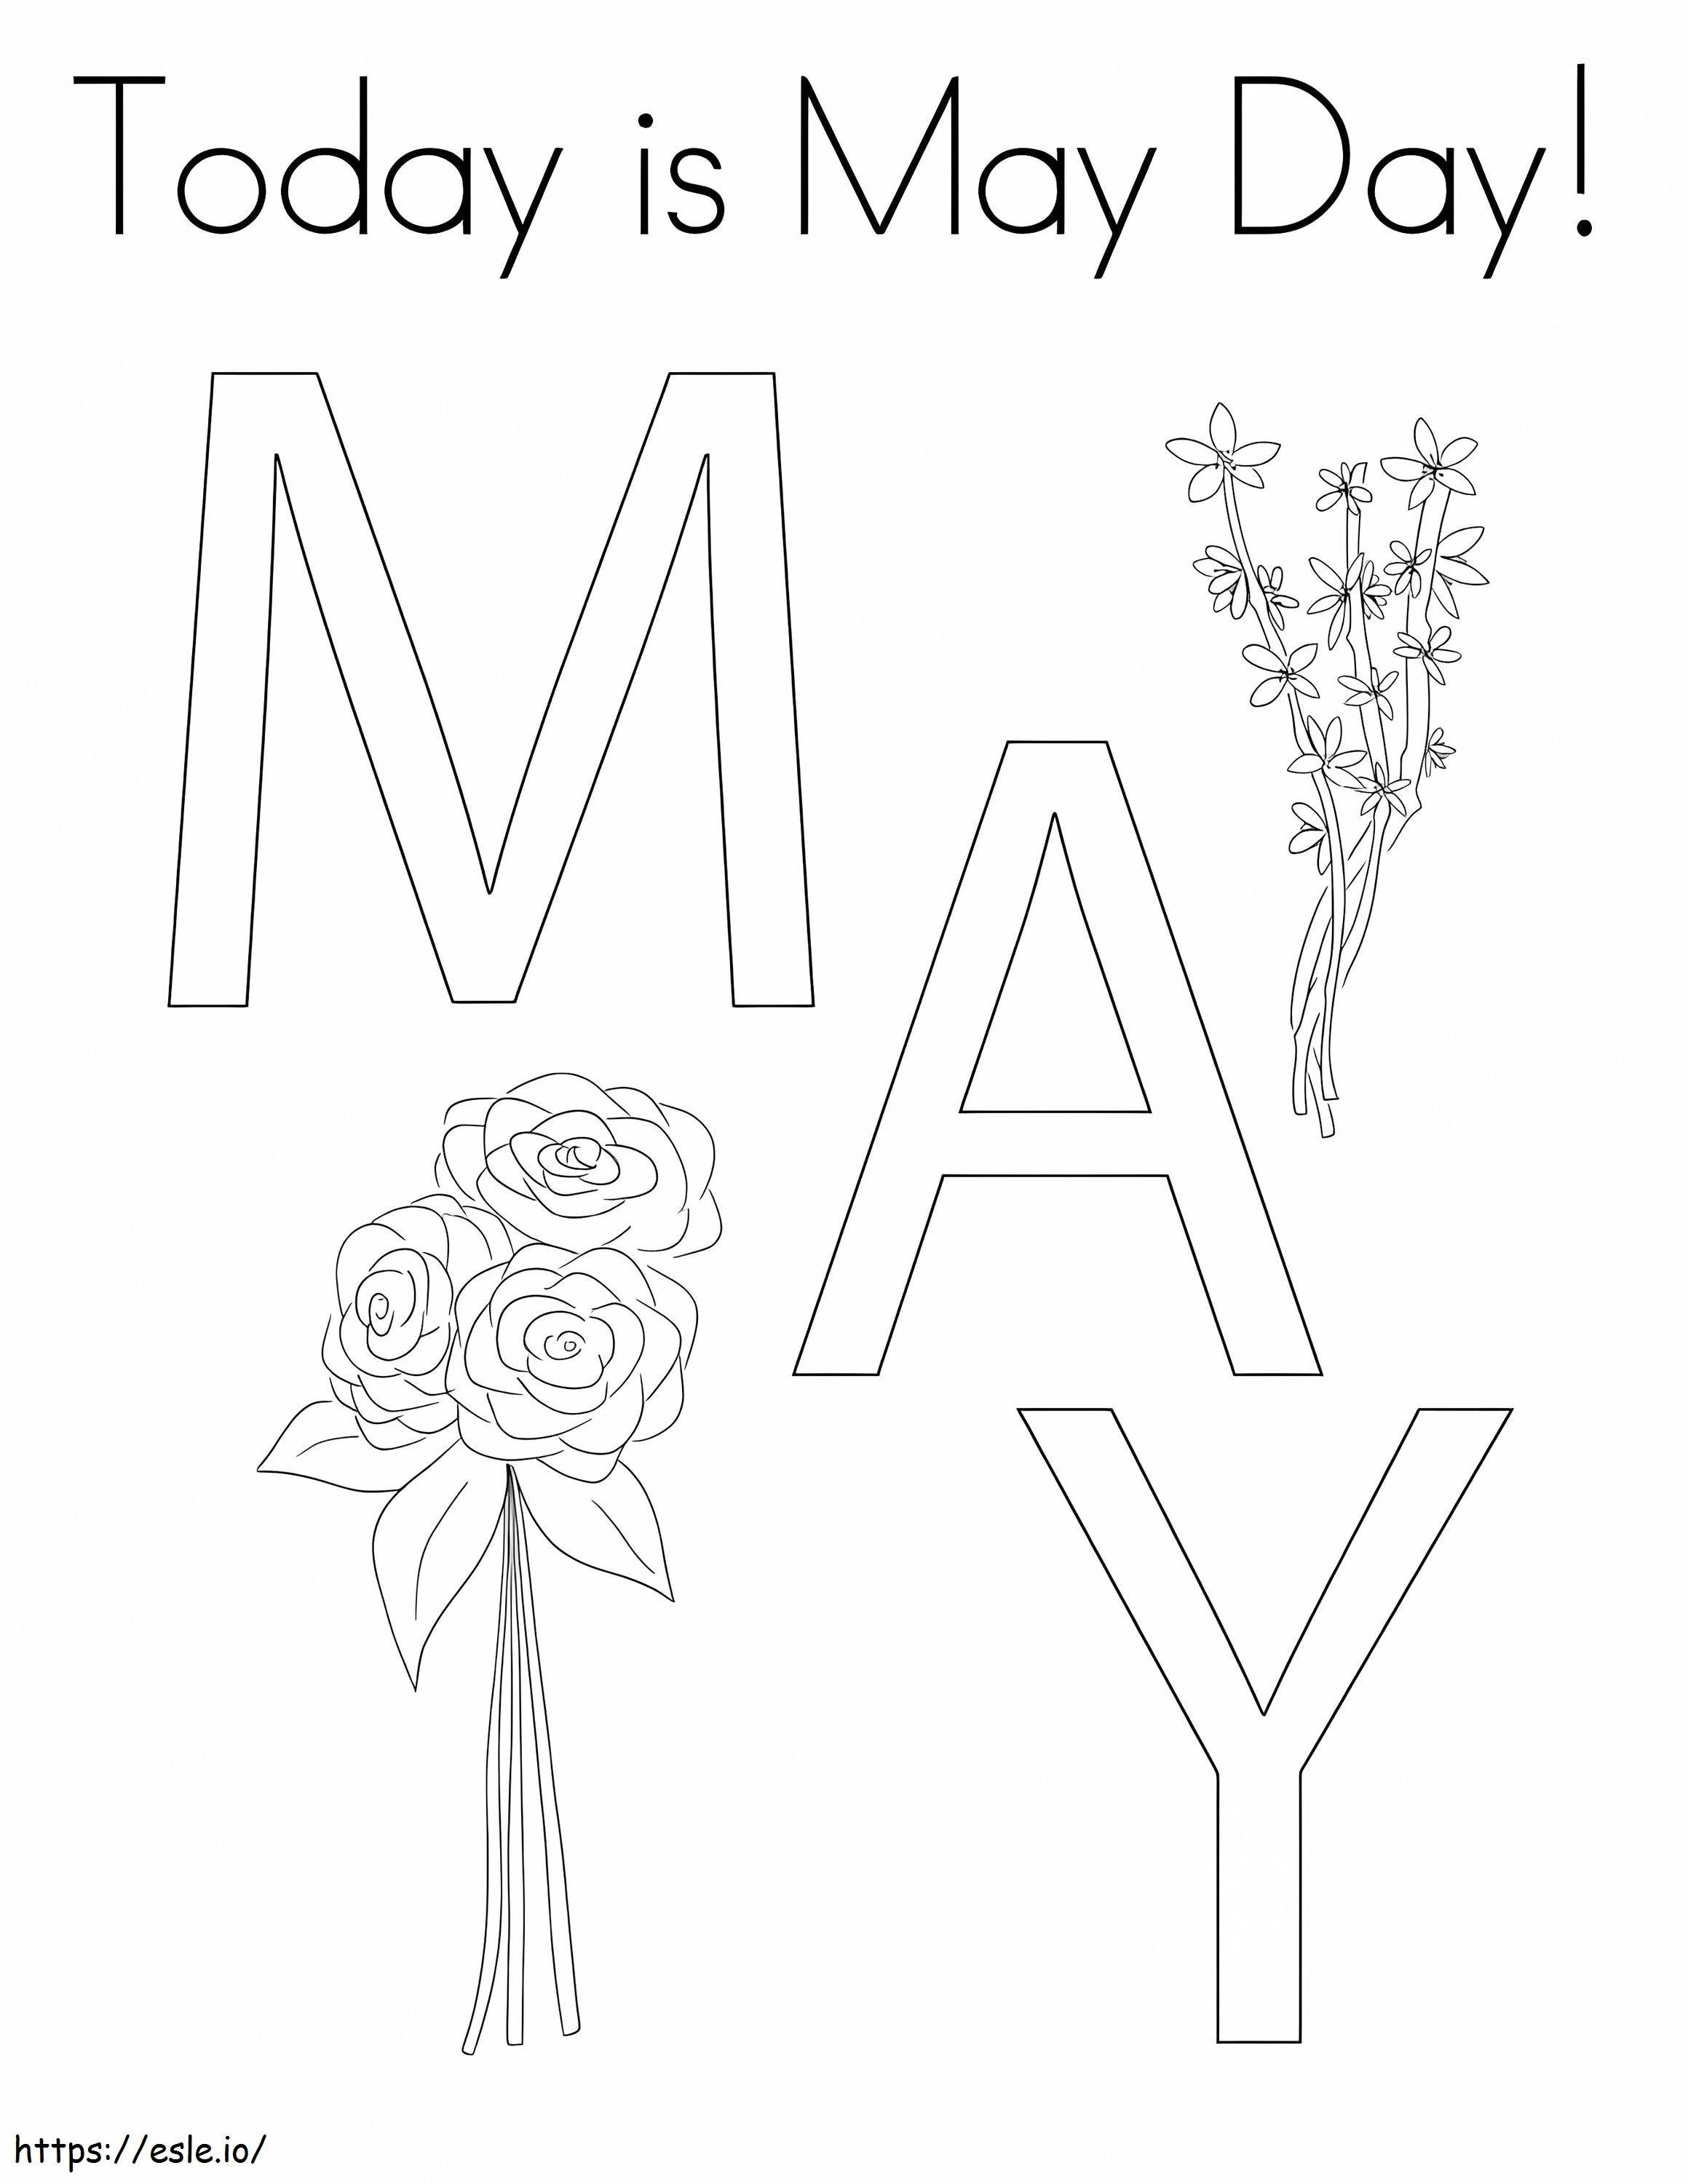 Today Is May Day coloring page